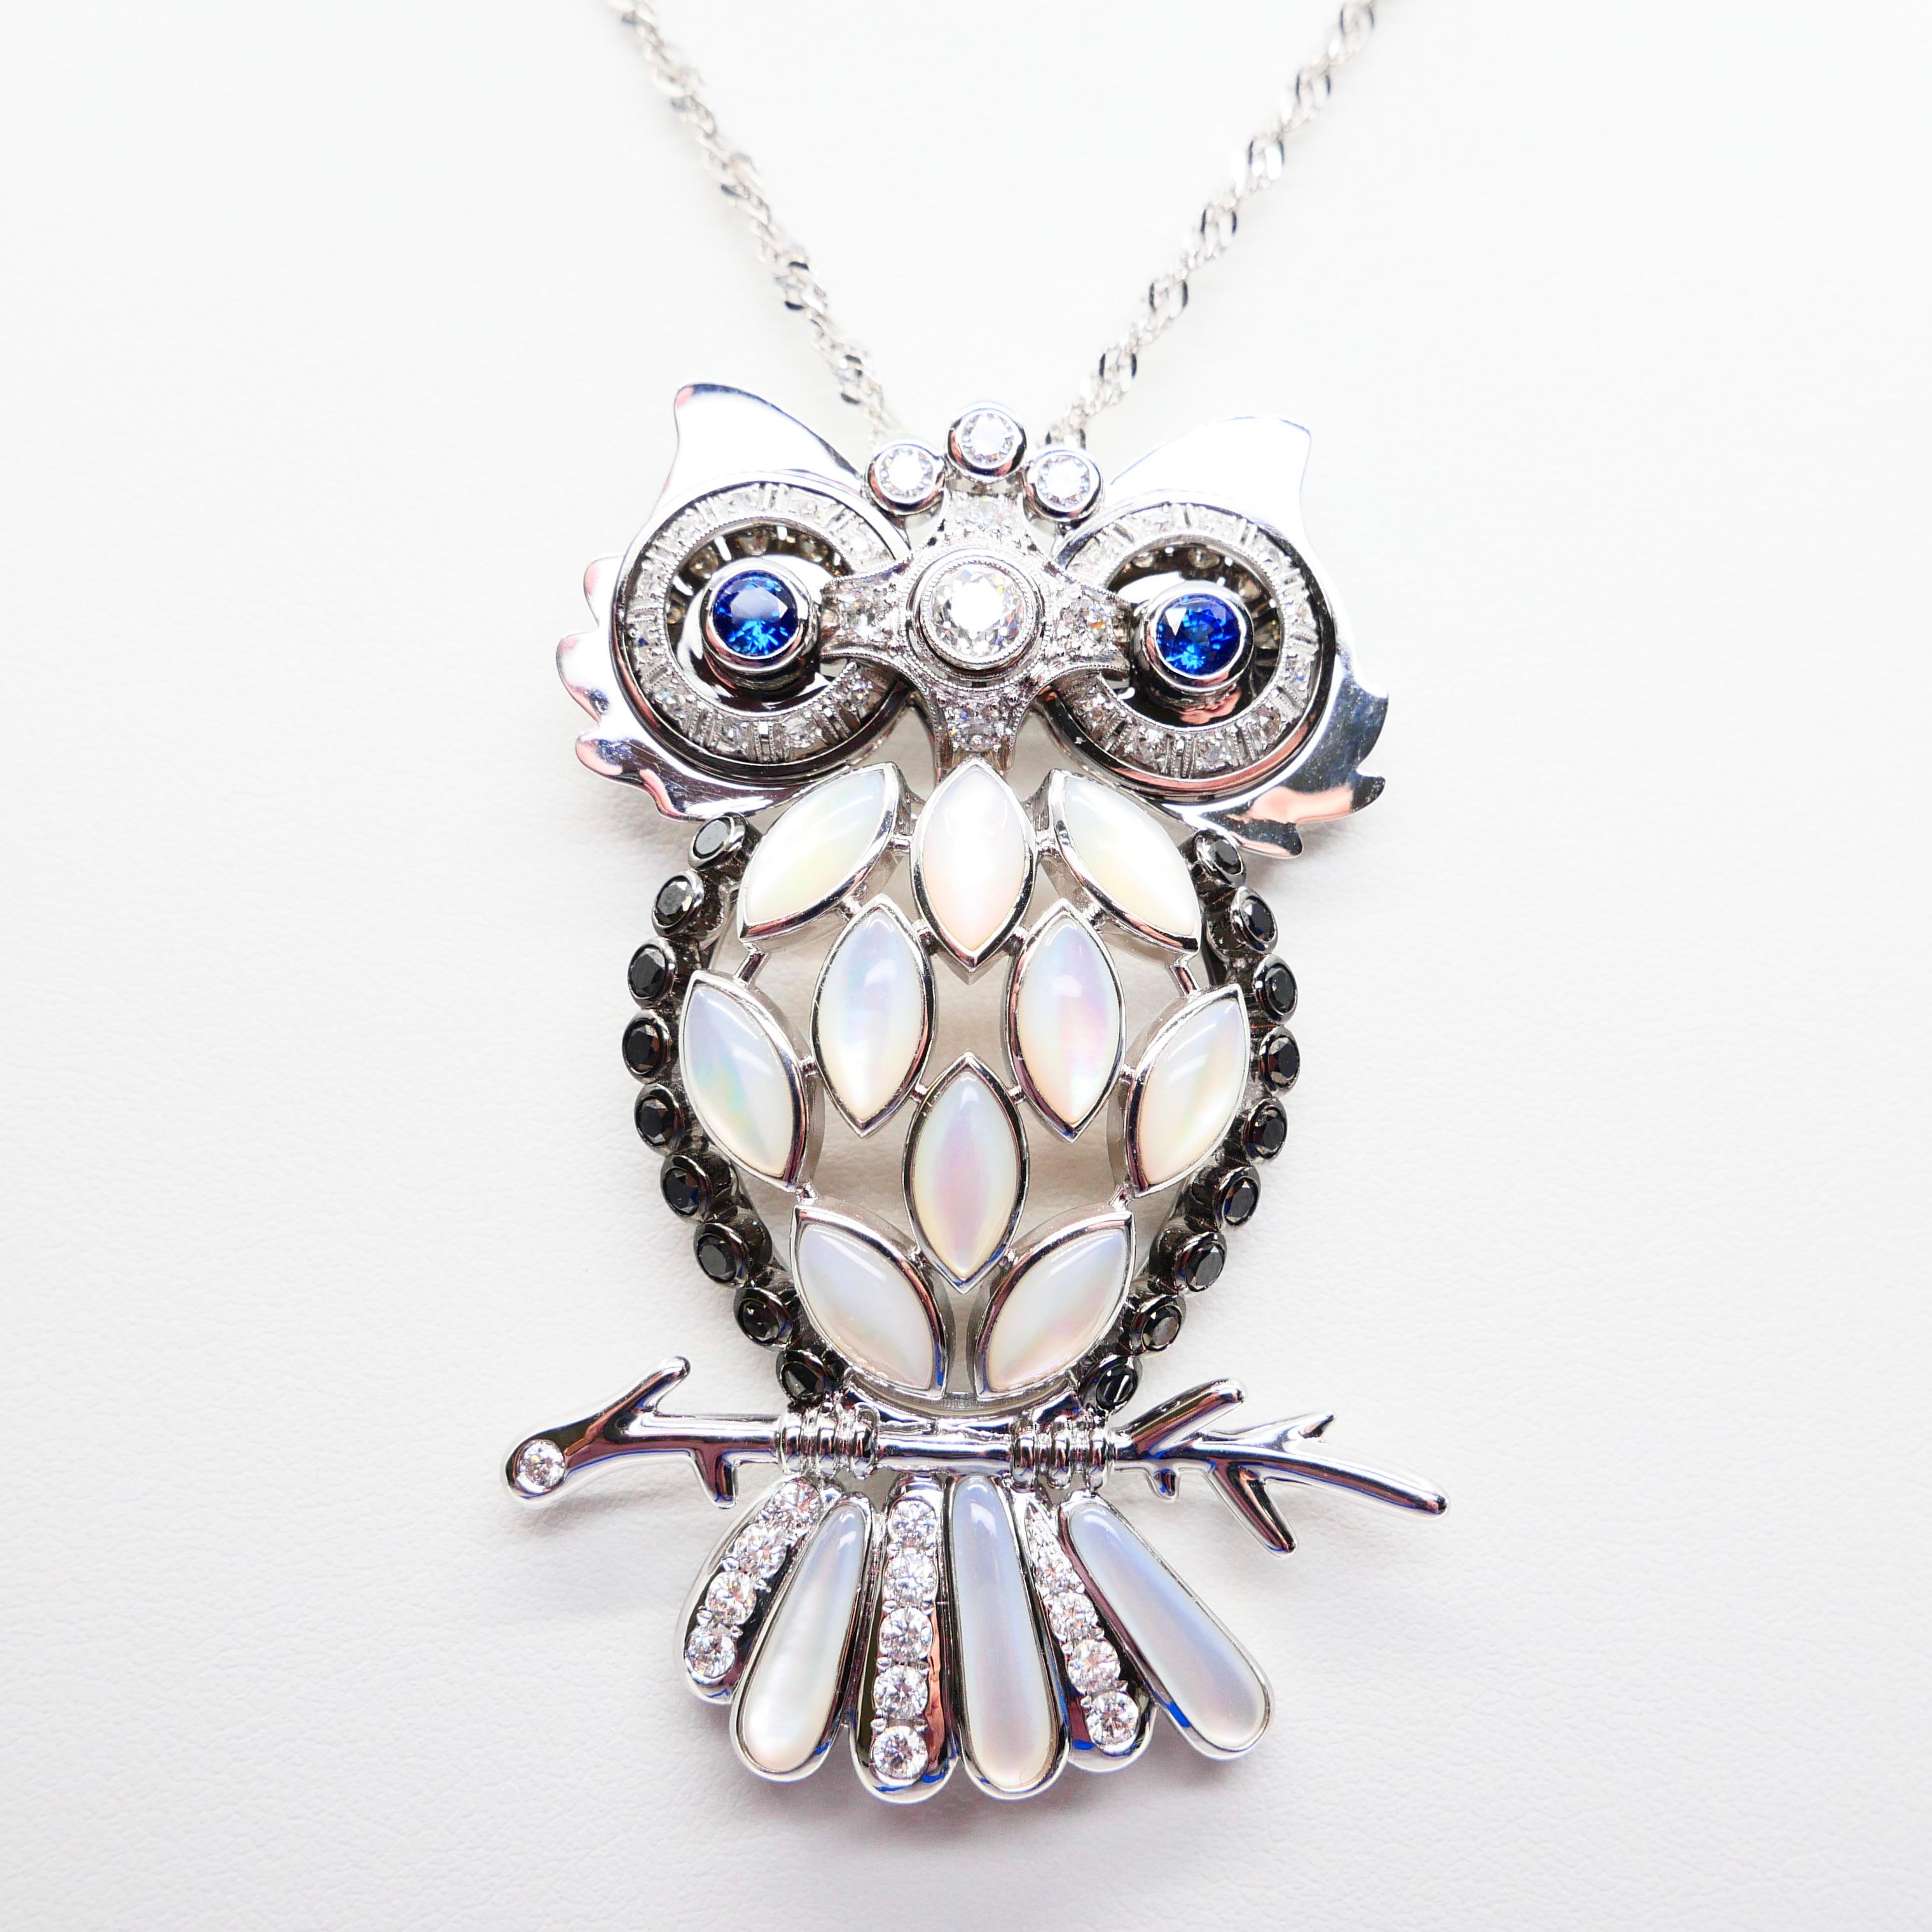 Old Cut and Black Diamonds, Sapphires, White Mother of Pearl Owl Brooch/Pendant For Sale 5